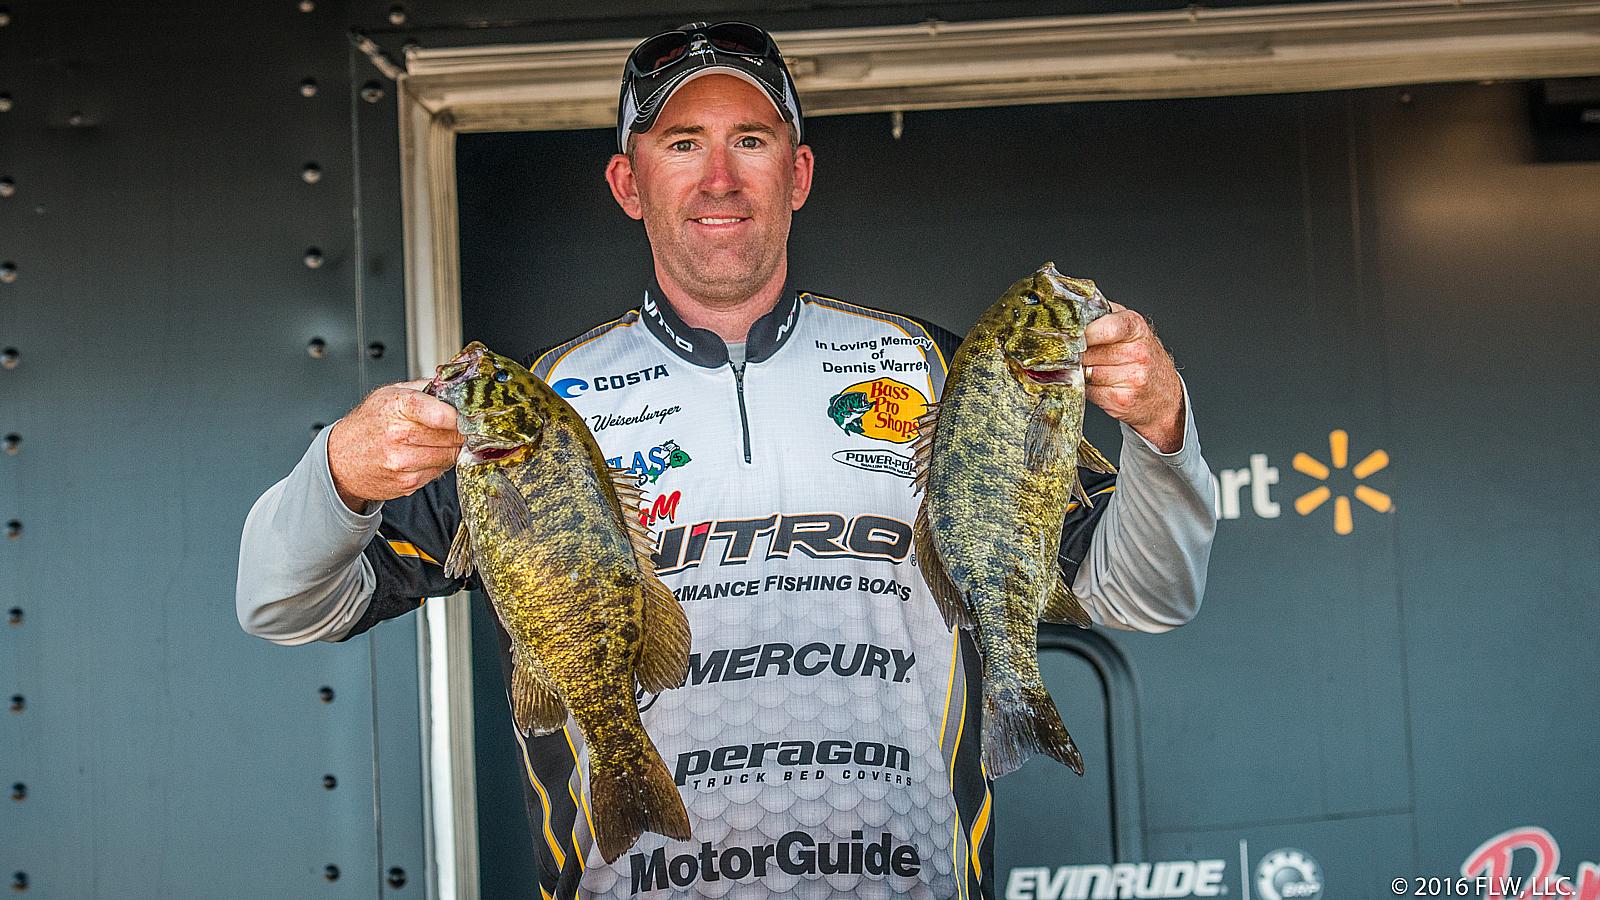 The Timing is Right for Weisenburger - Major League Fishing